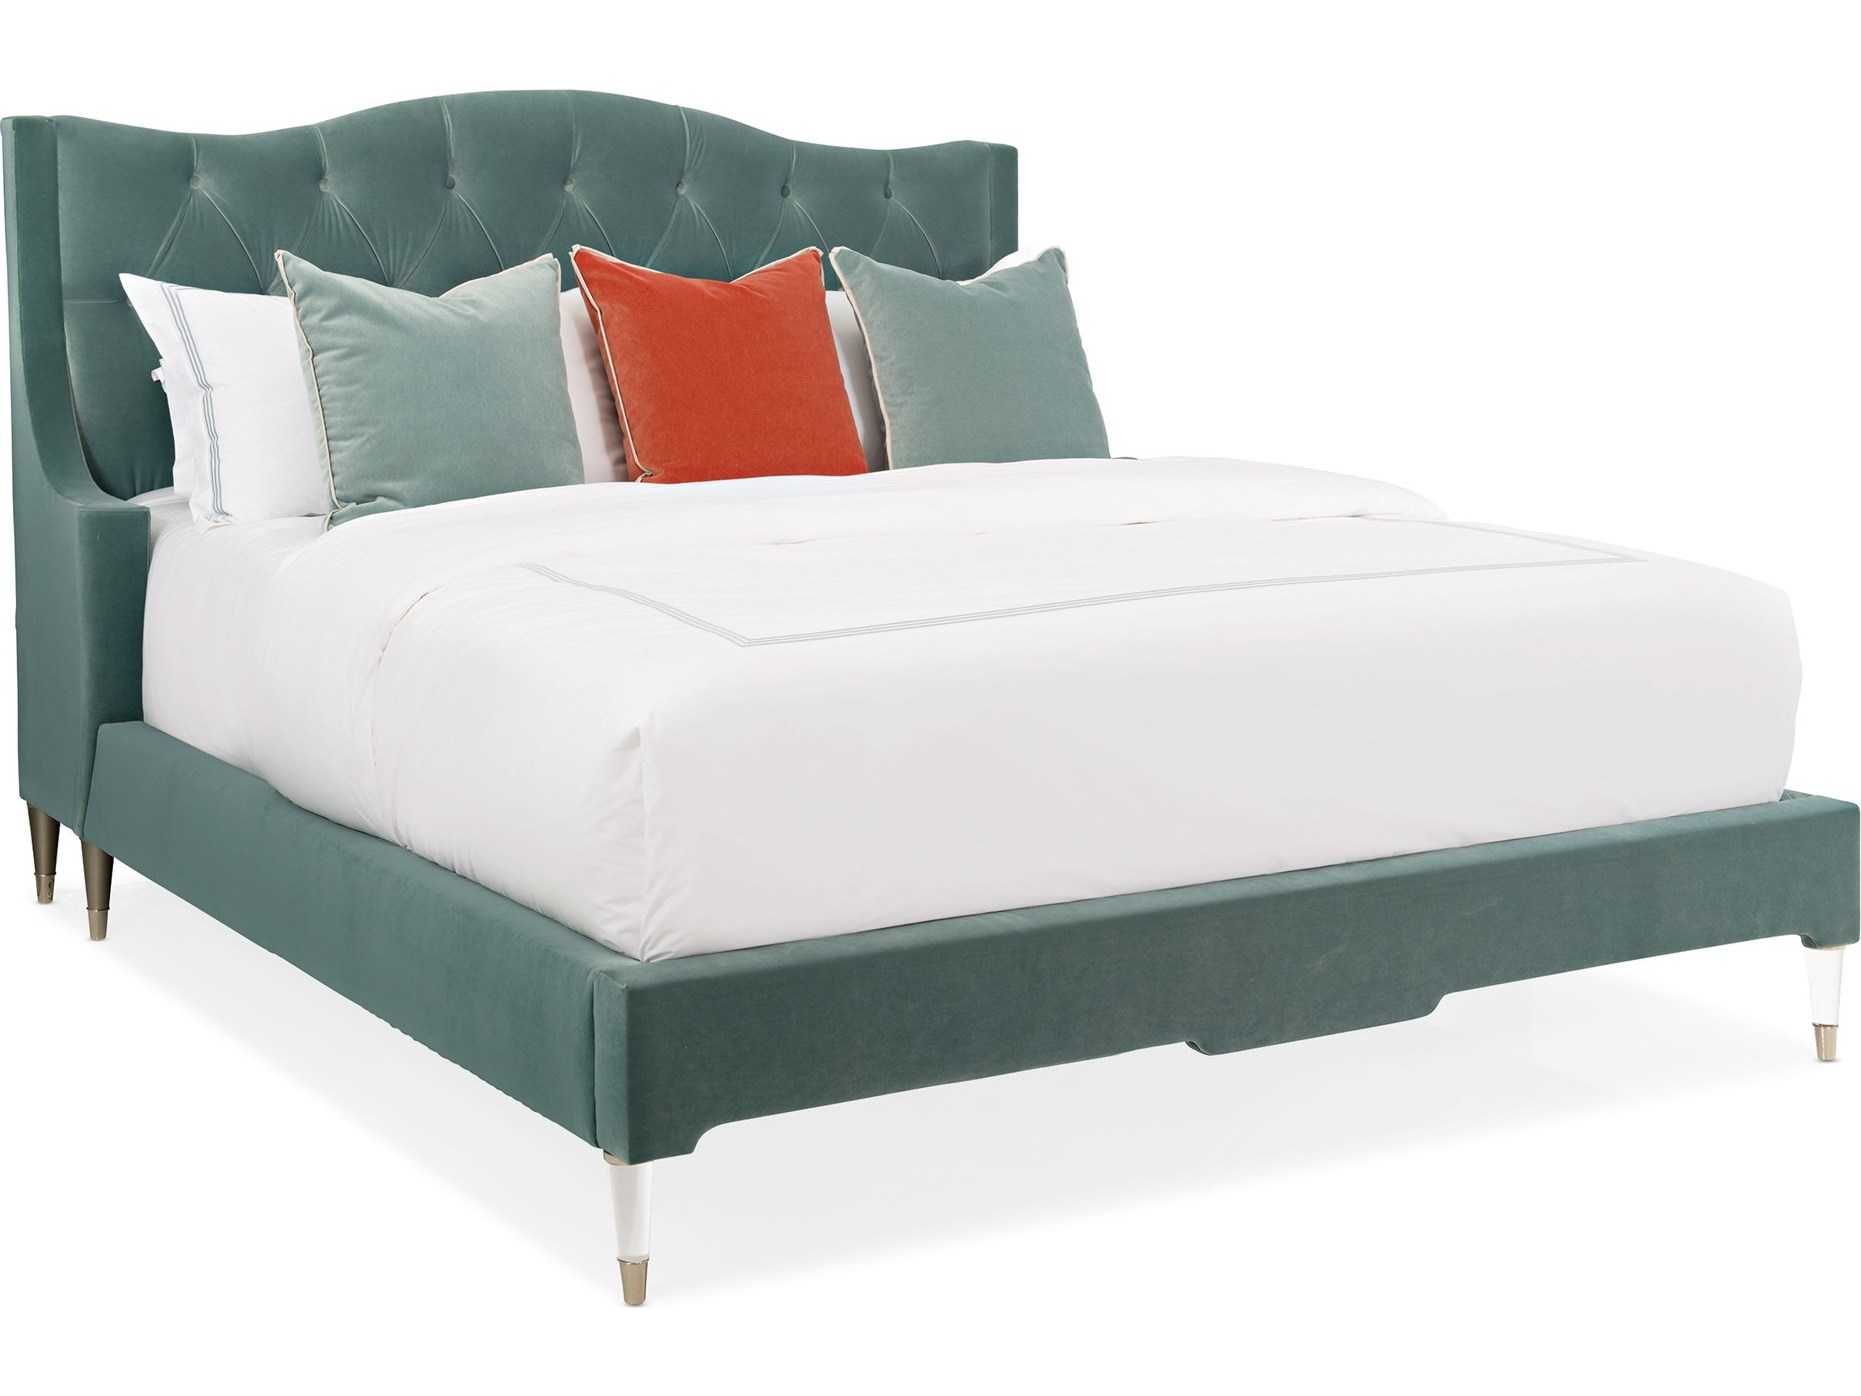 Caracole Classic Blue Acrylic King, Caracole King Bed